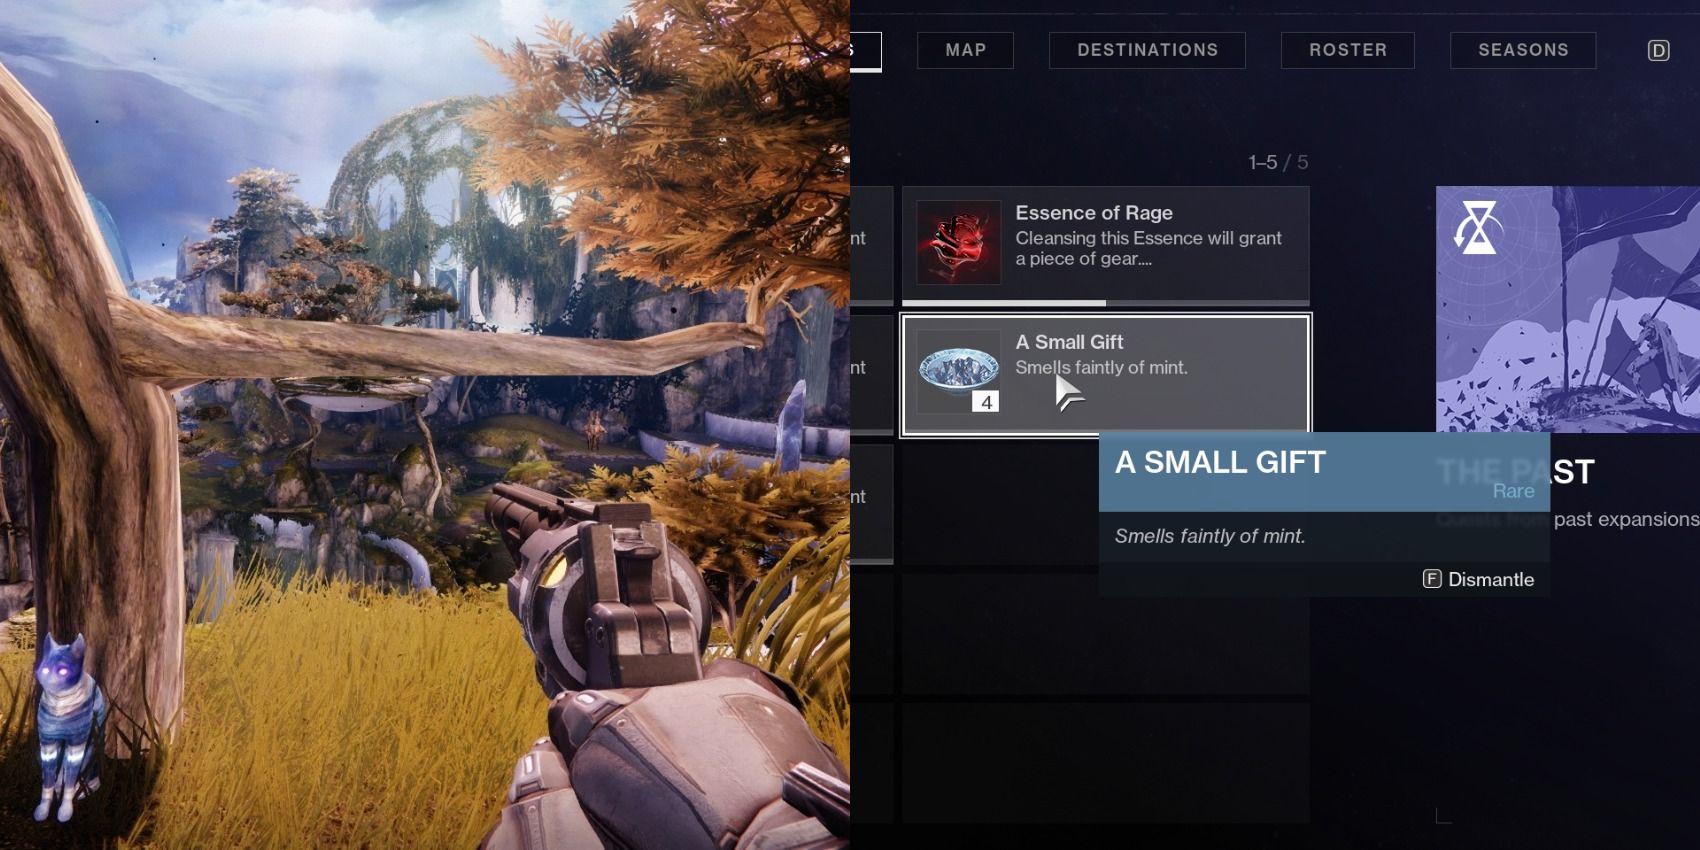 Destiny 2 How To Get "A Small Gift" And Every Cat Statue